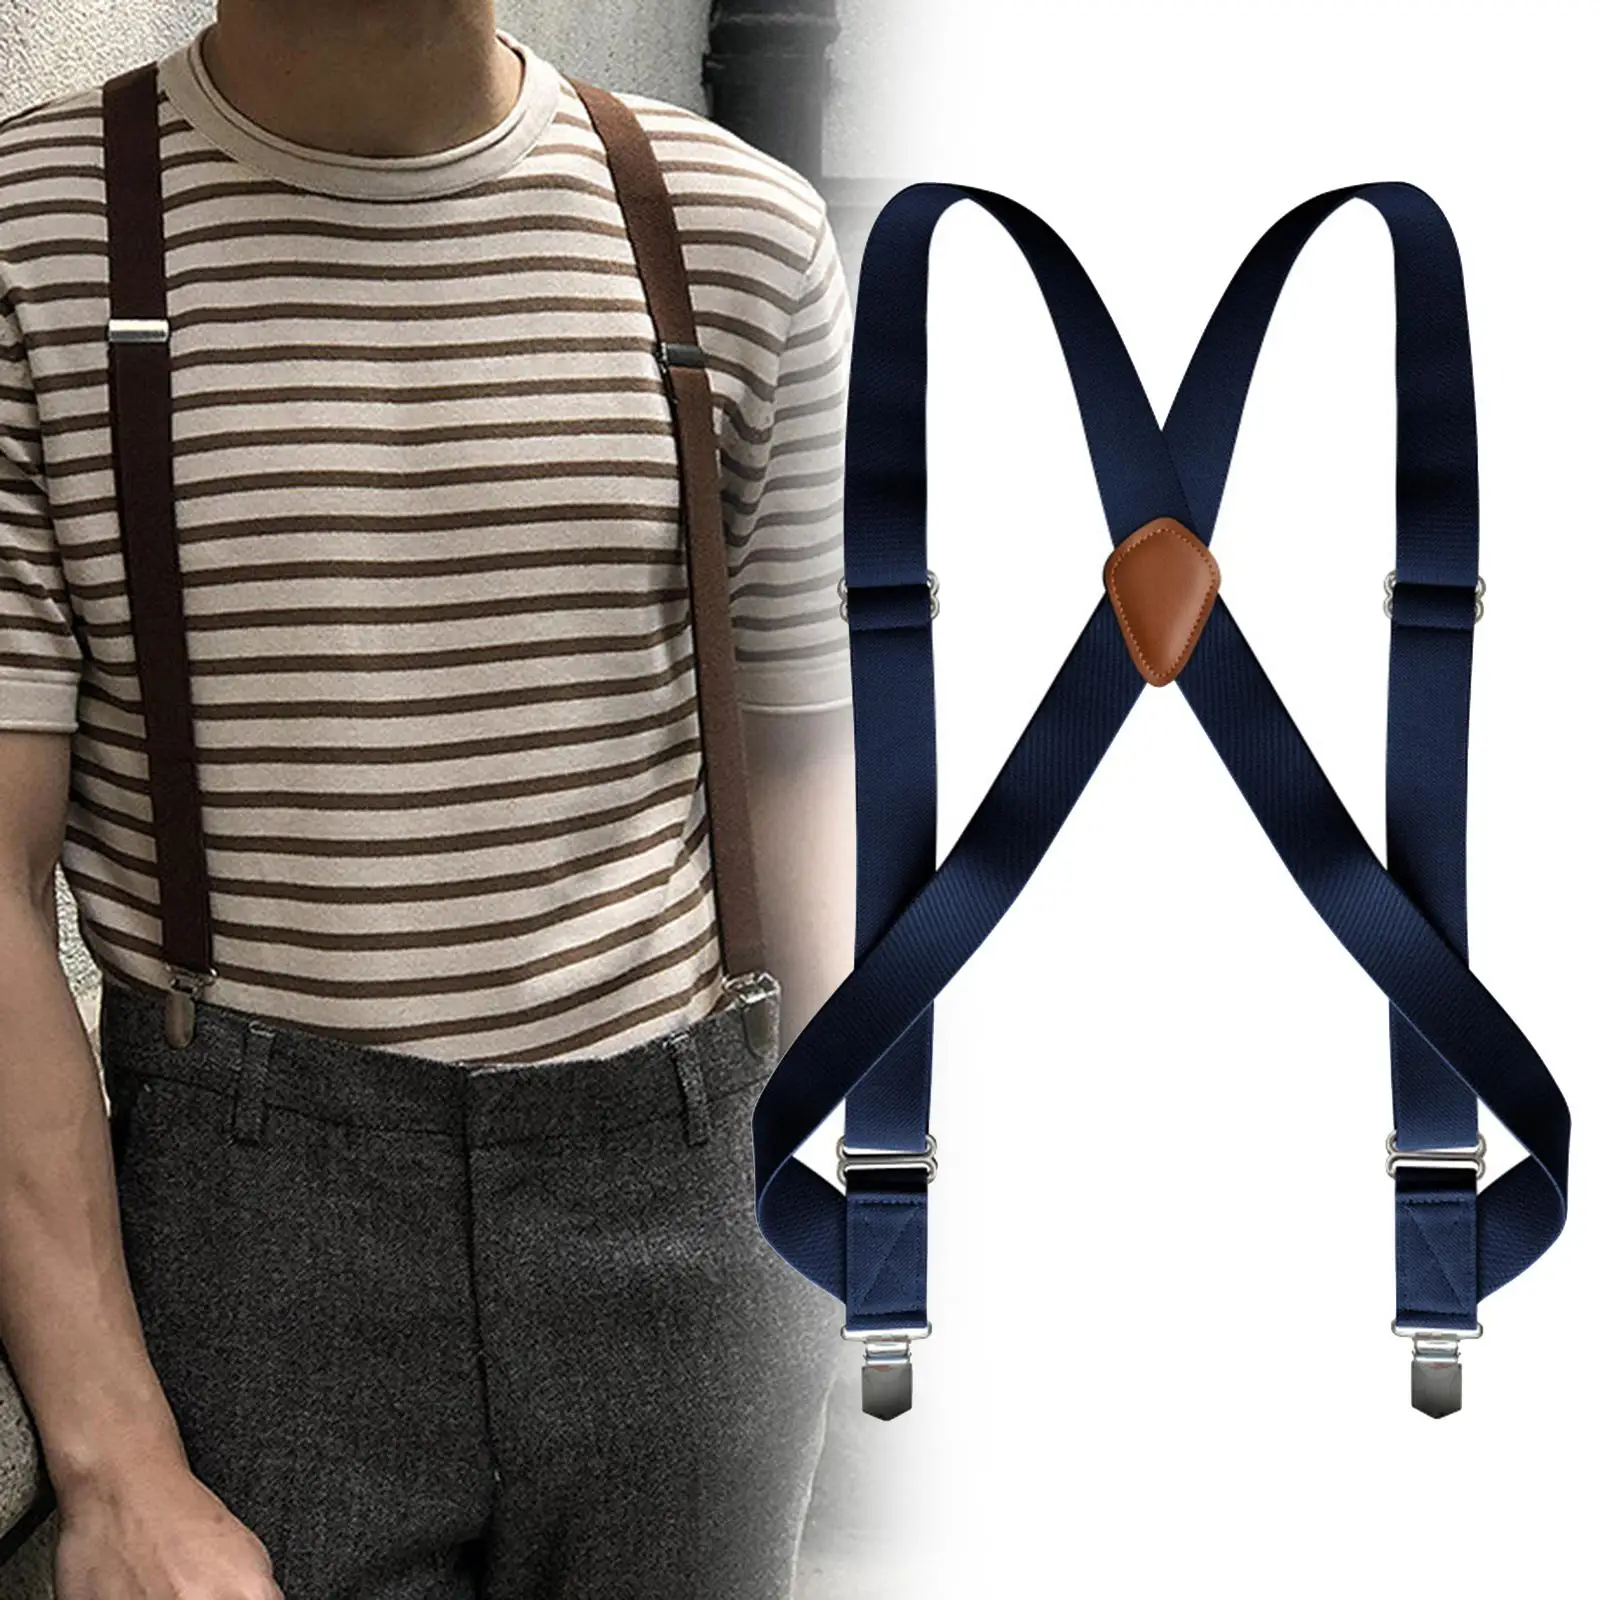 Mens Suspender with Clips Work Suspenders for Boyfriends Trousers Suit Pants